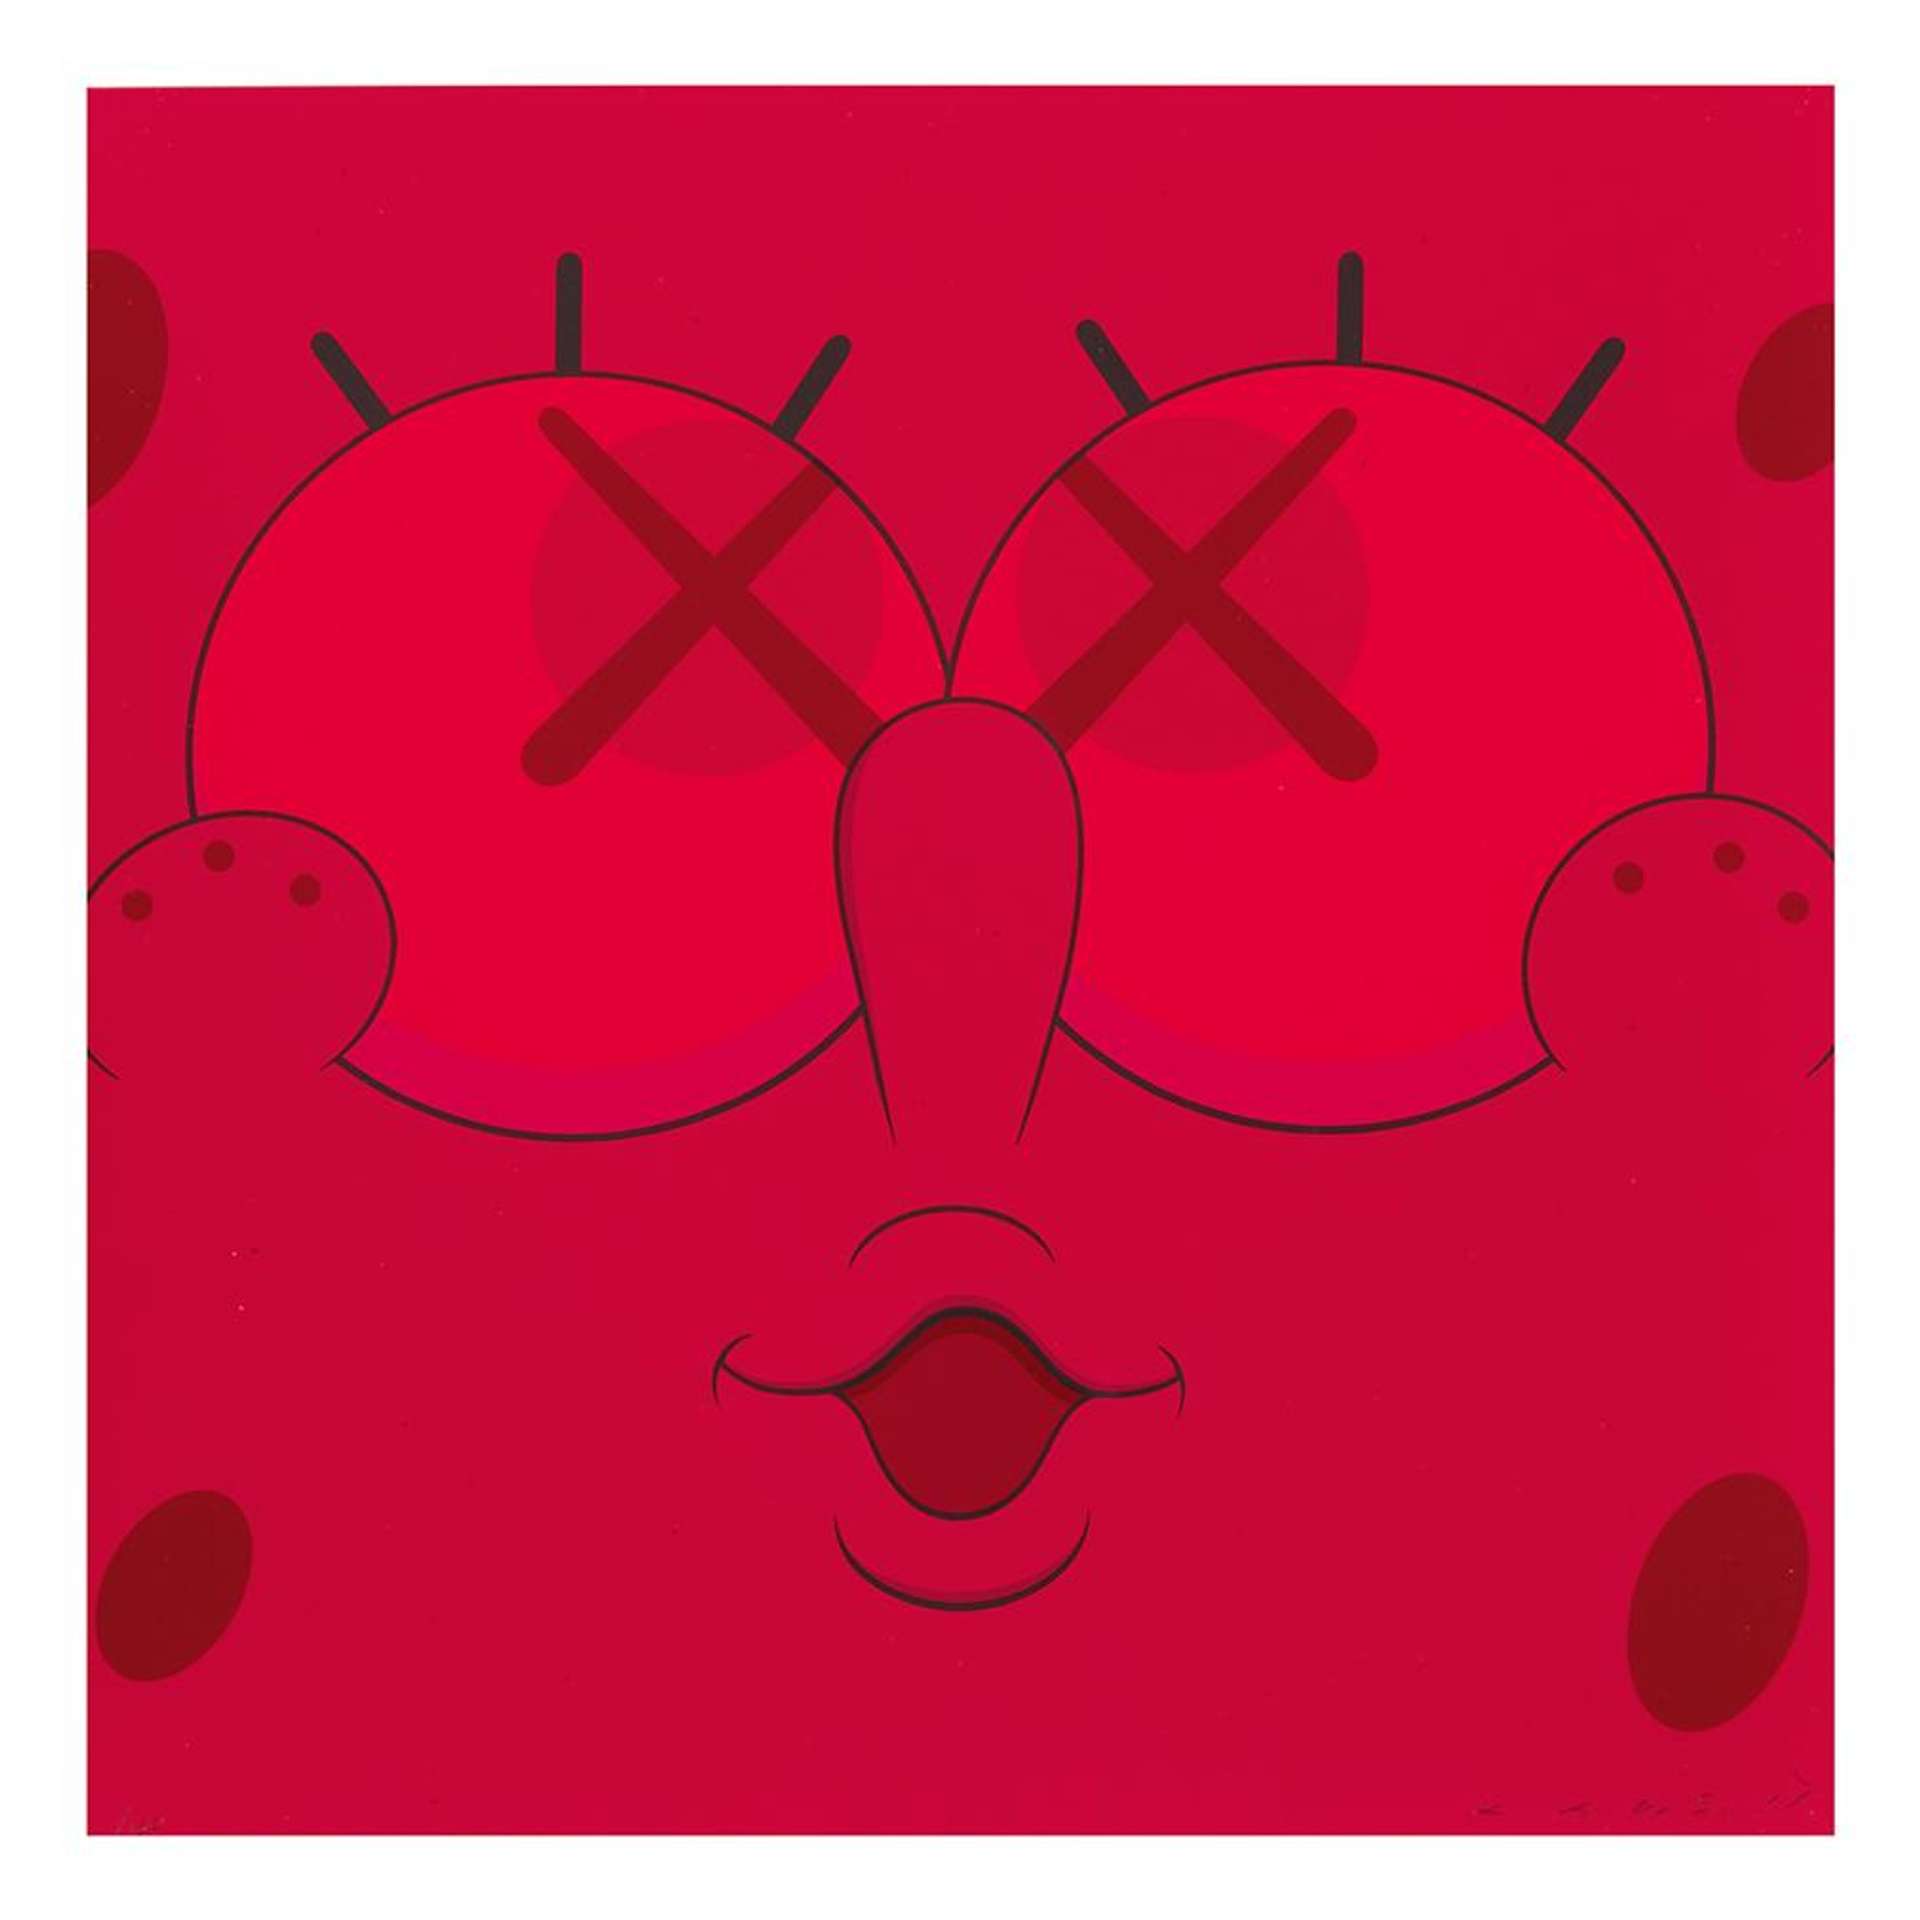 KAWS’ Kawsbob (red). A screenprint of the cartoon character, Spongebob, with crossed out eyes in red. 